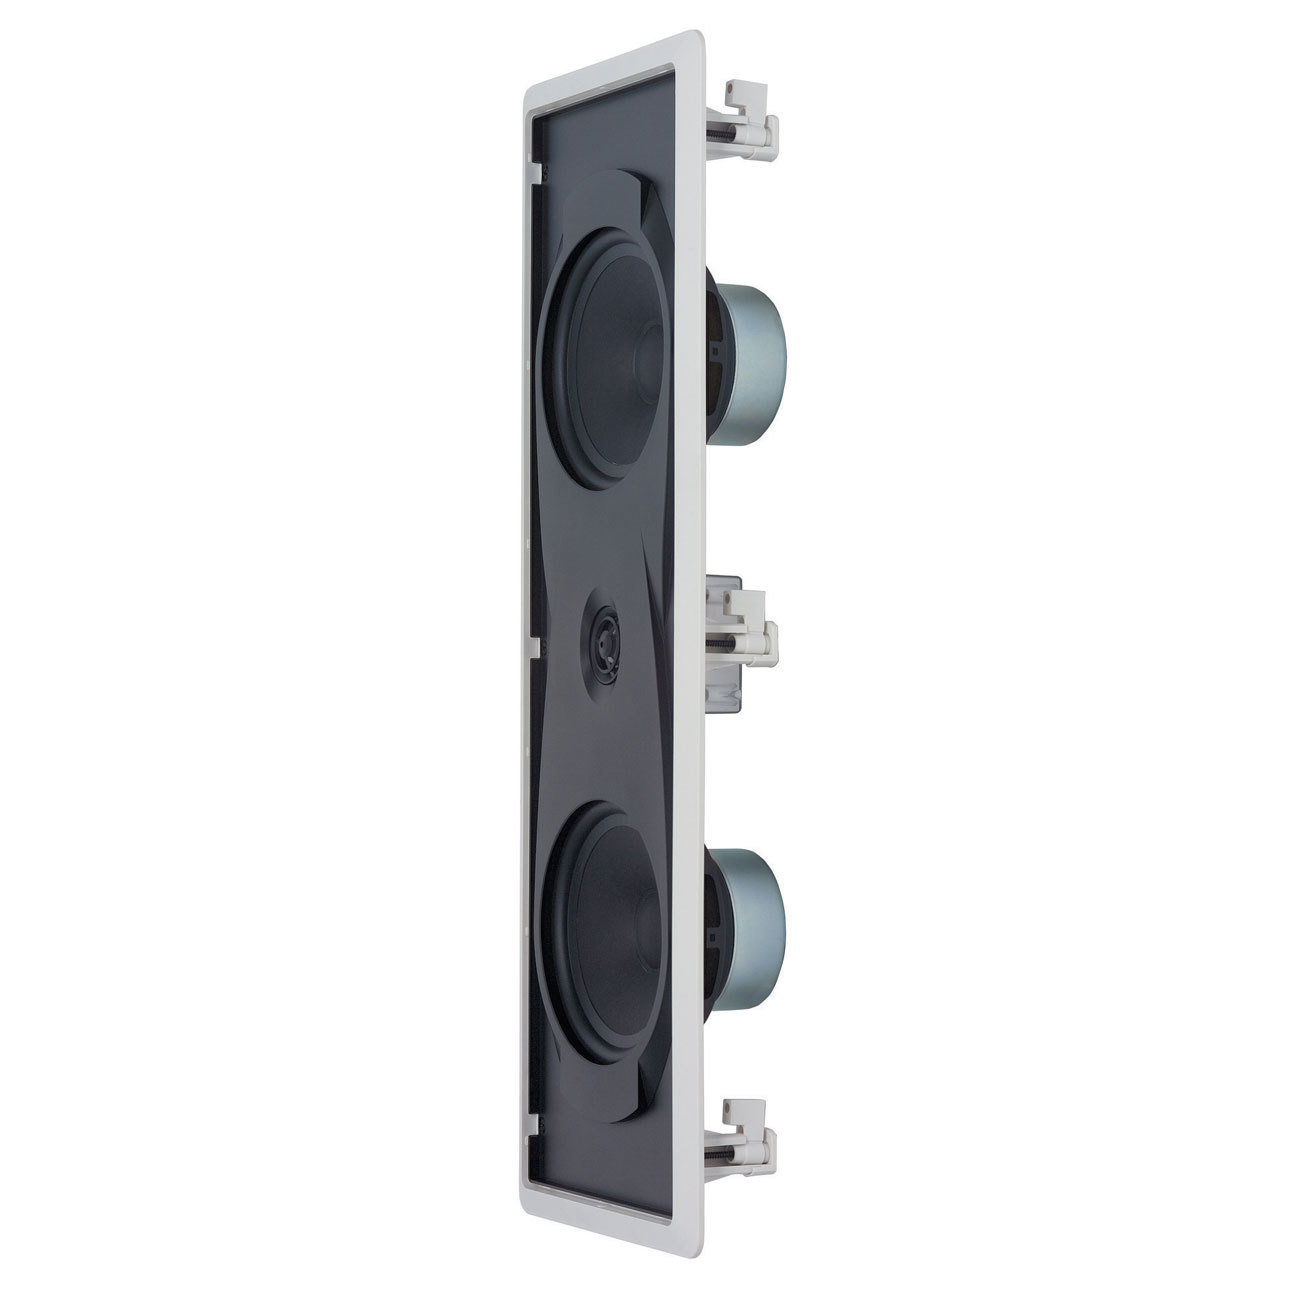 Yamaha NS-IW760 6.5" 2-Way In-Wall Speaker System (White) - image 3 of 3